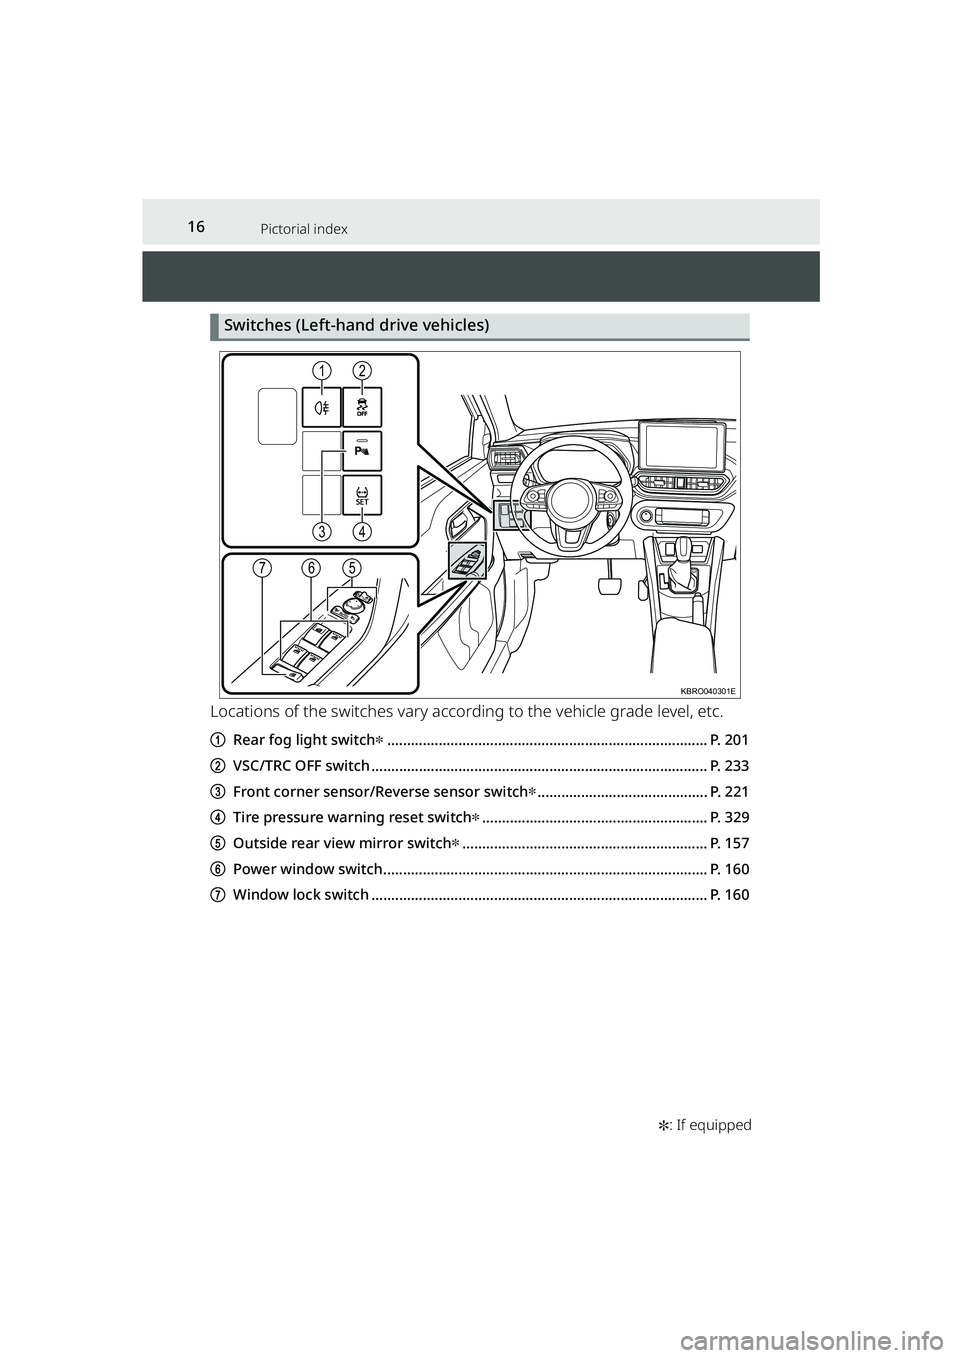 TOYOTA RAIZE 2023  Owners Manual 16Pictorial index
RAIZE_OM_General_BZ358E✽
: If equipped
Switches (Left-hand  drive vehicles)
Locations of the switches vary acco rding to the vehicle grade level, etc.
aRear fog light switch✽....